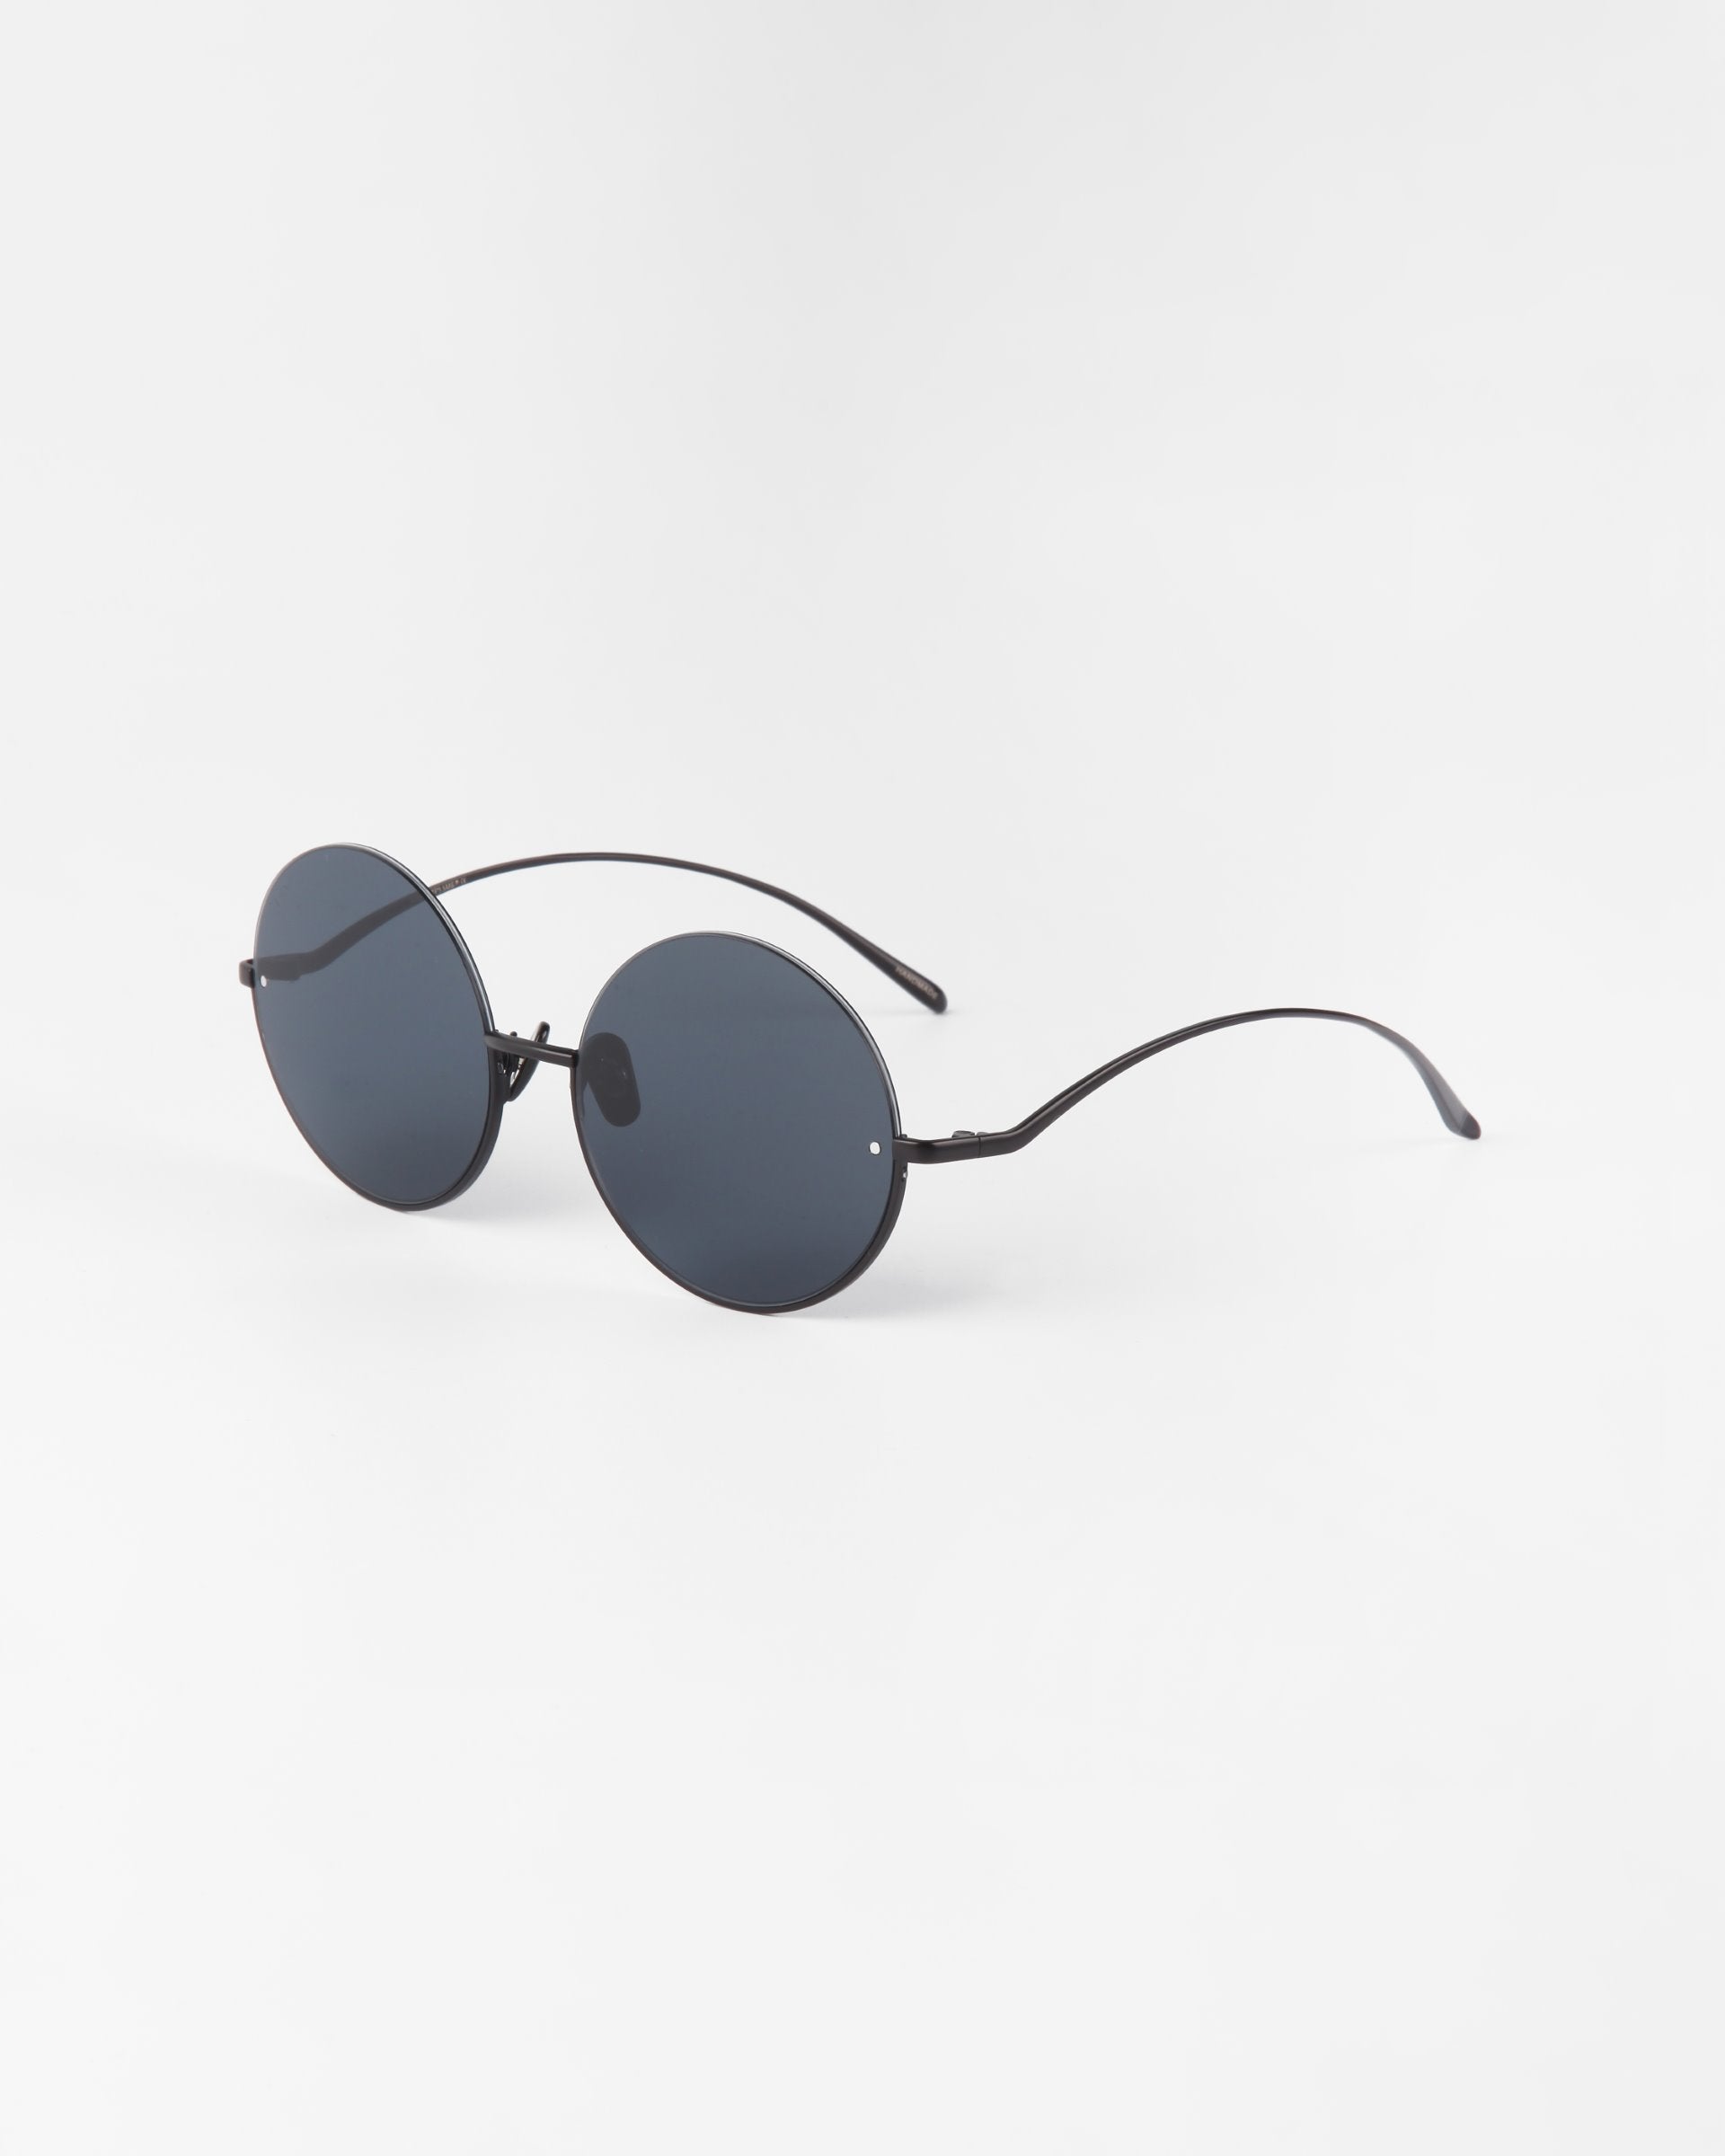 A pair of Oceana sunglasses by For Art&#39;s Sake® with black nylon lenses offering UVA &amp; UVB protection and thin stainless steel arms is positioned against a plain white background.